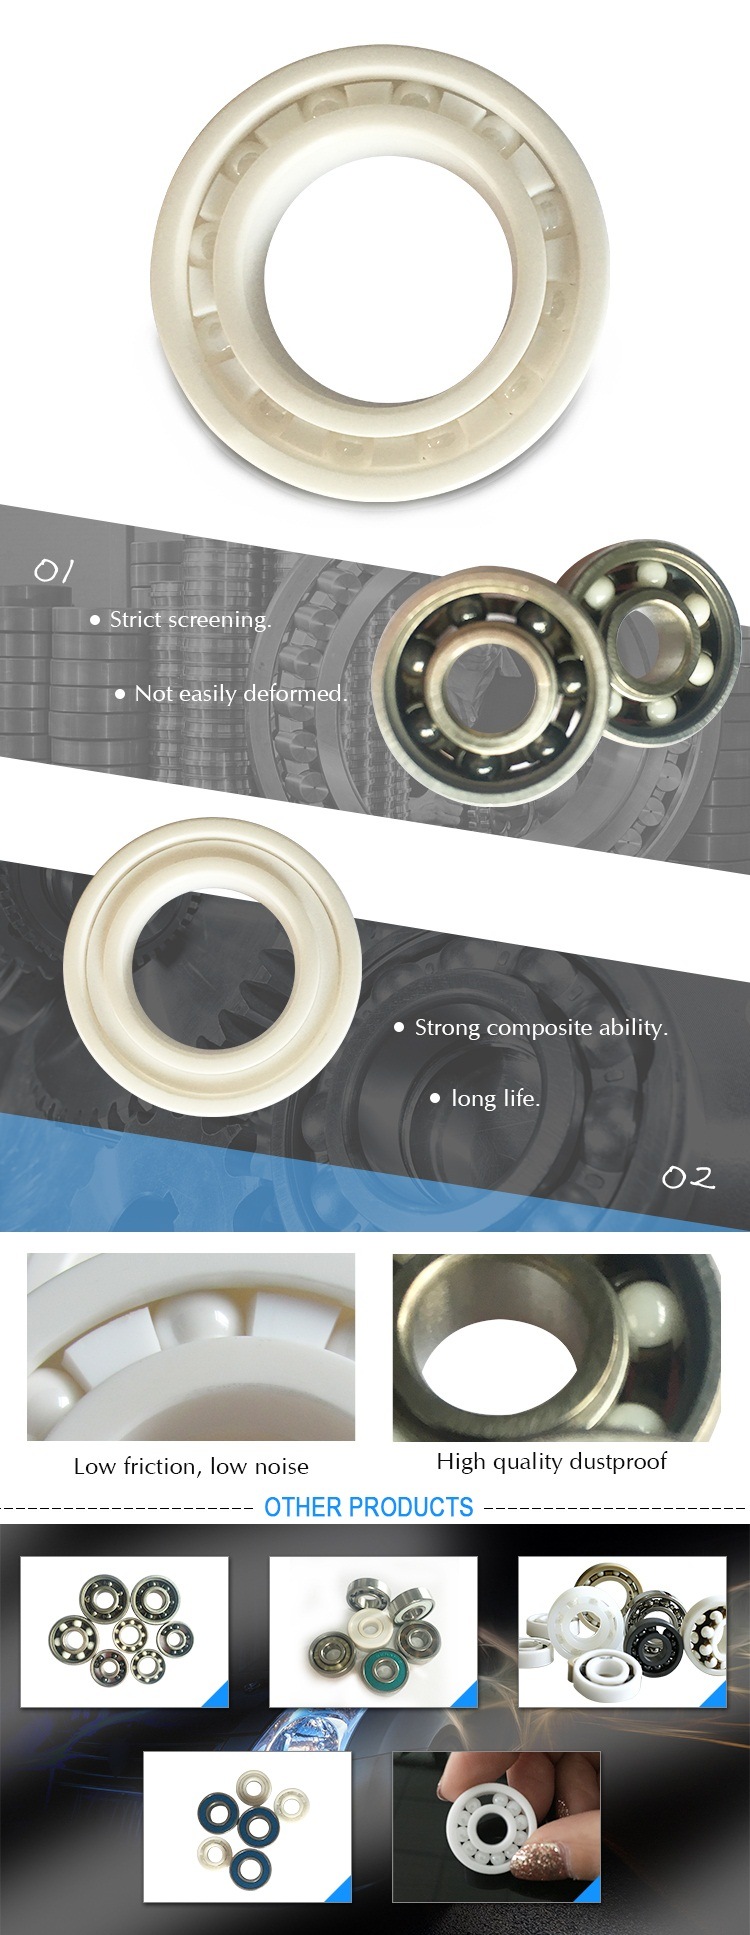 High Performance and Low Noise 6207 Ceramic Bearing